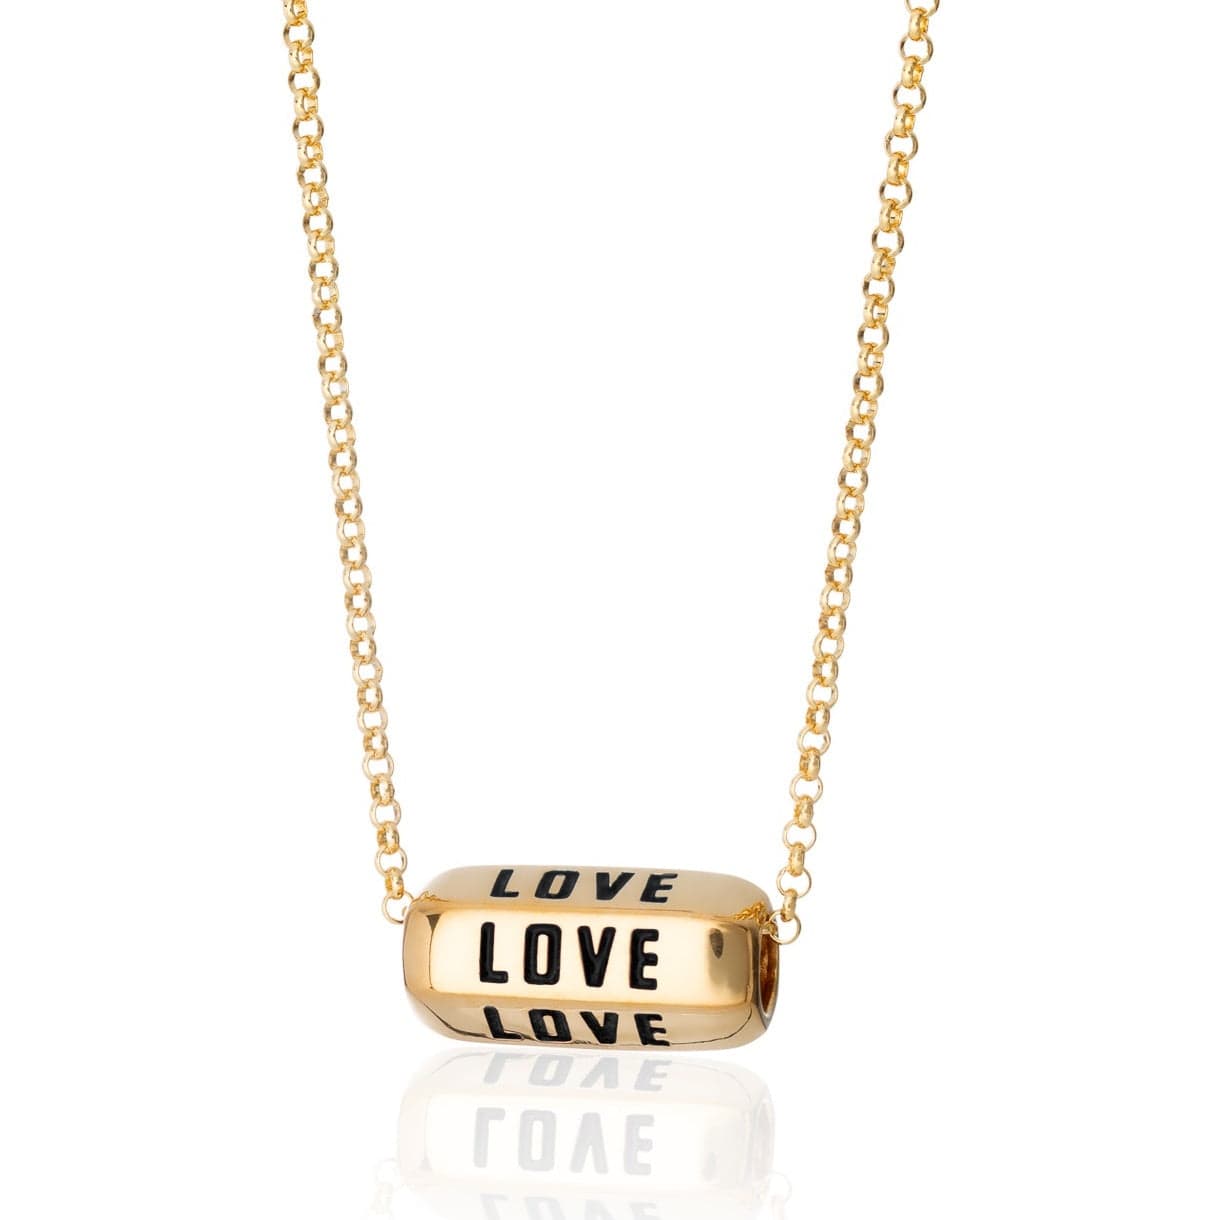 NKL-GPL Love is All Around Necklace in Black